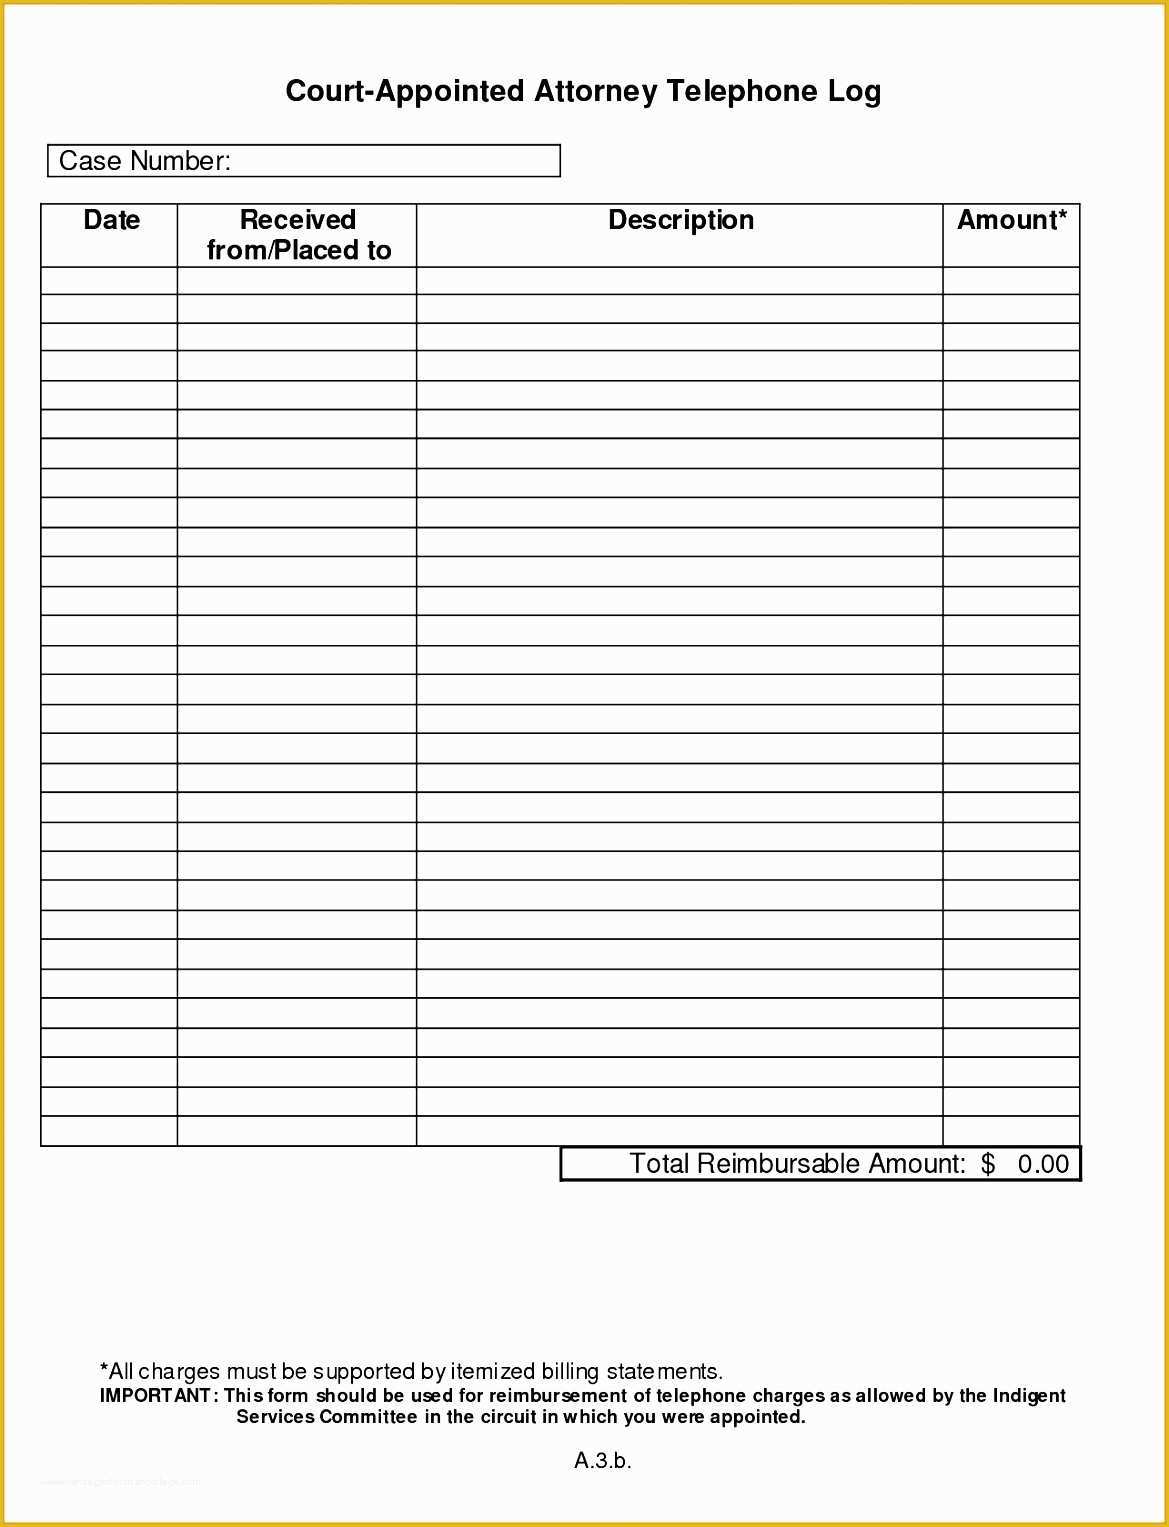 Travel Expense Sheet Template Free Of 8 Travel Expense Report with Mileage Log Exceltemplates